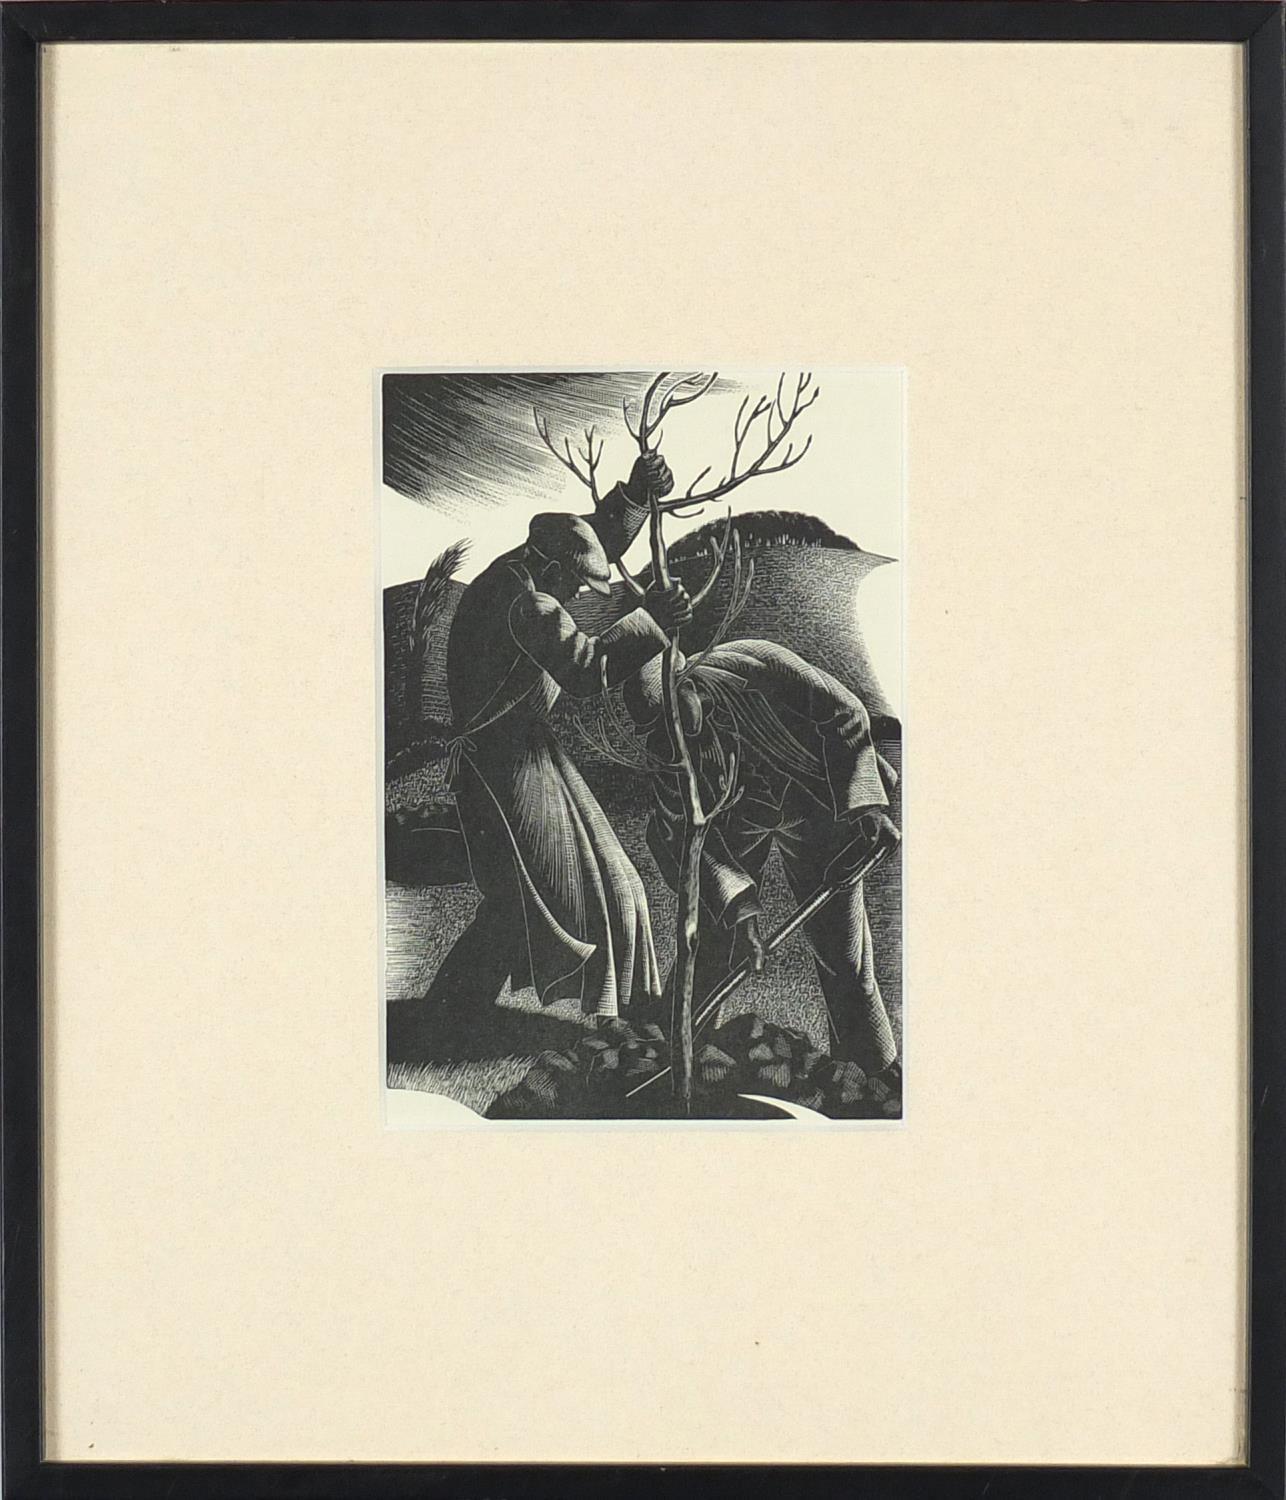 Claire Leighton - Men planting, black and white print, mounted and framed, 17.5cm x 12cm :For - Image 2 of 3